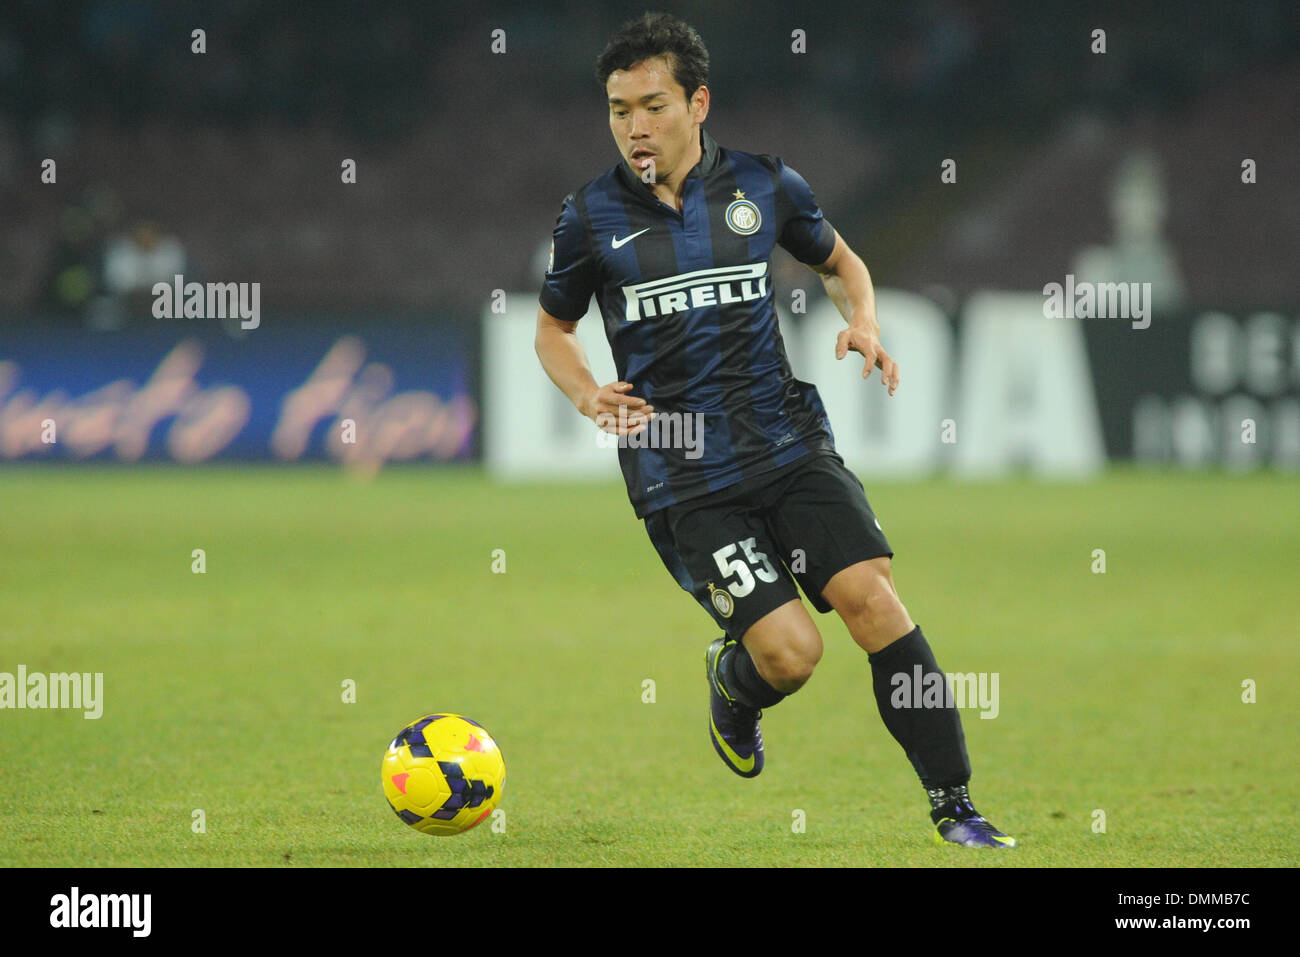 Naples, Italy. 15th Dec, 2013. Yuto Nagatomo of FC Internazionale Milano during the Serie A match between SSC Napoli and Parma FC at Stadio San Paolo on Dicembre 15, 2013 in Naples, Italy. Photo: Franco Romano/Nurphoto Credit:  Franco Romano/NurPhoto/ZUMAPRESS.com/Alamy Live News Stock Photo